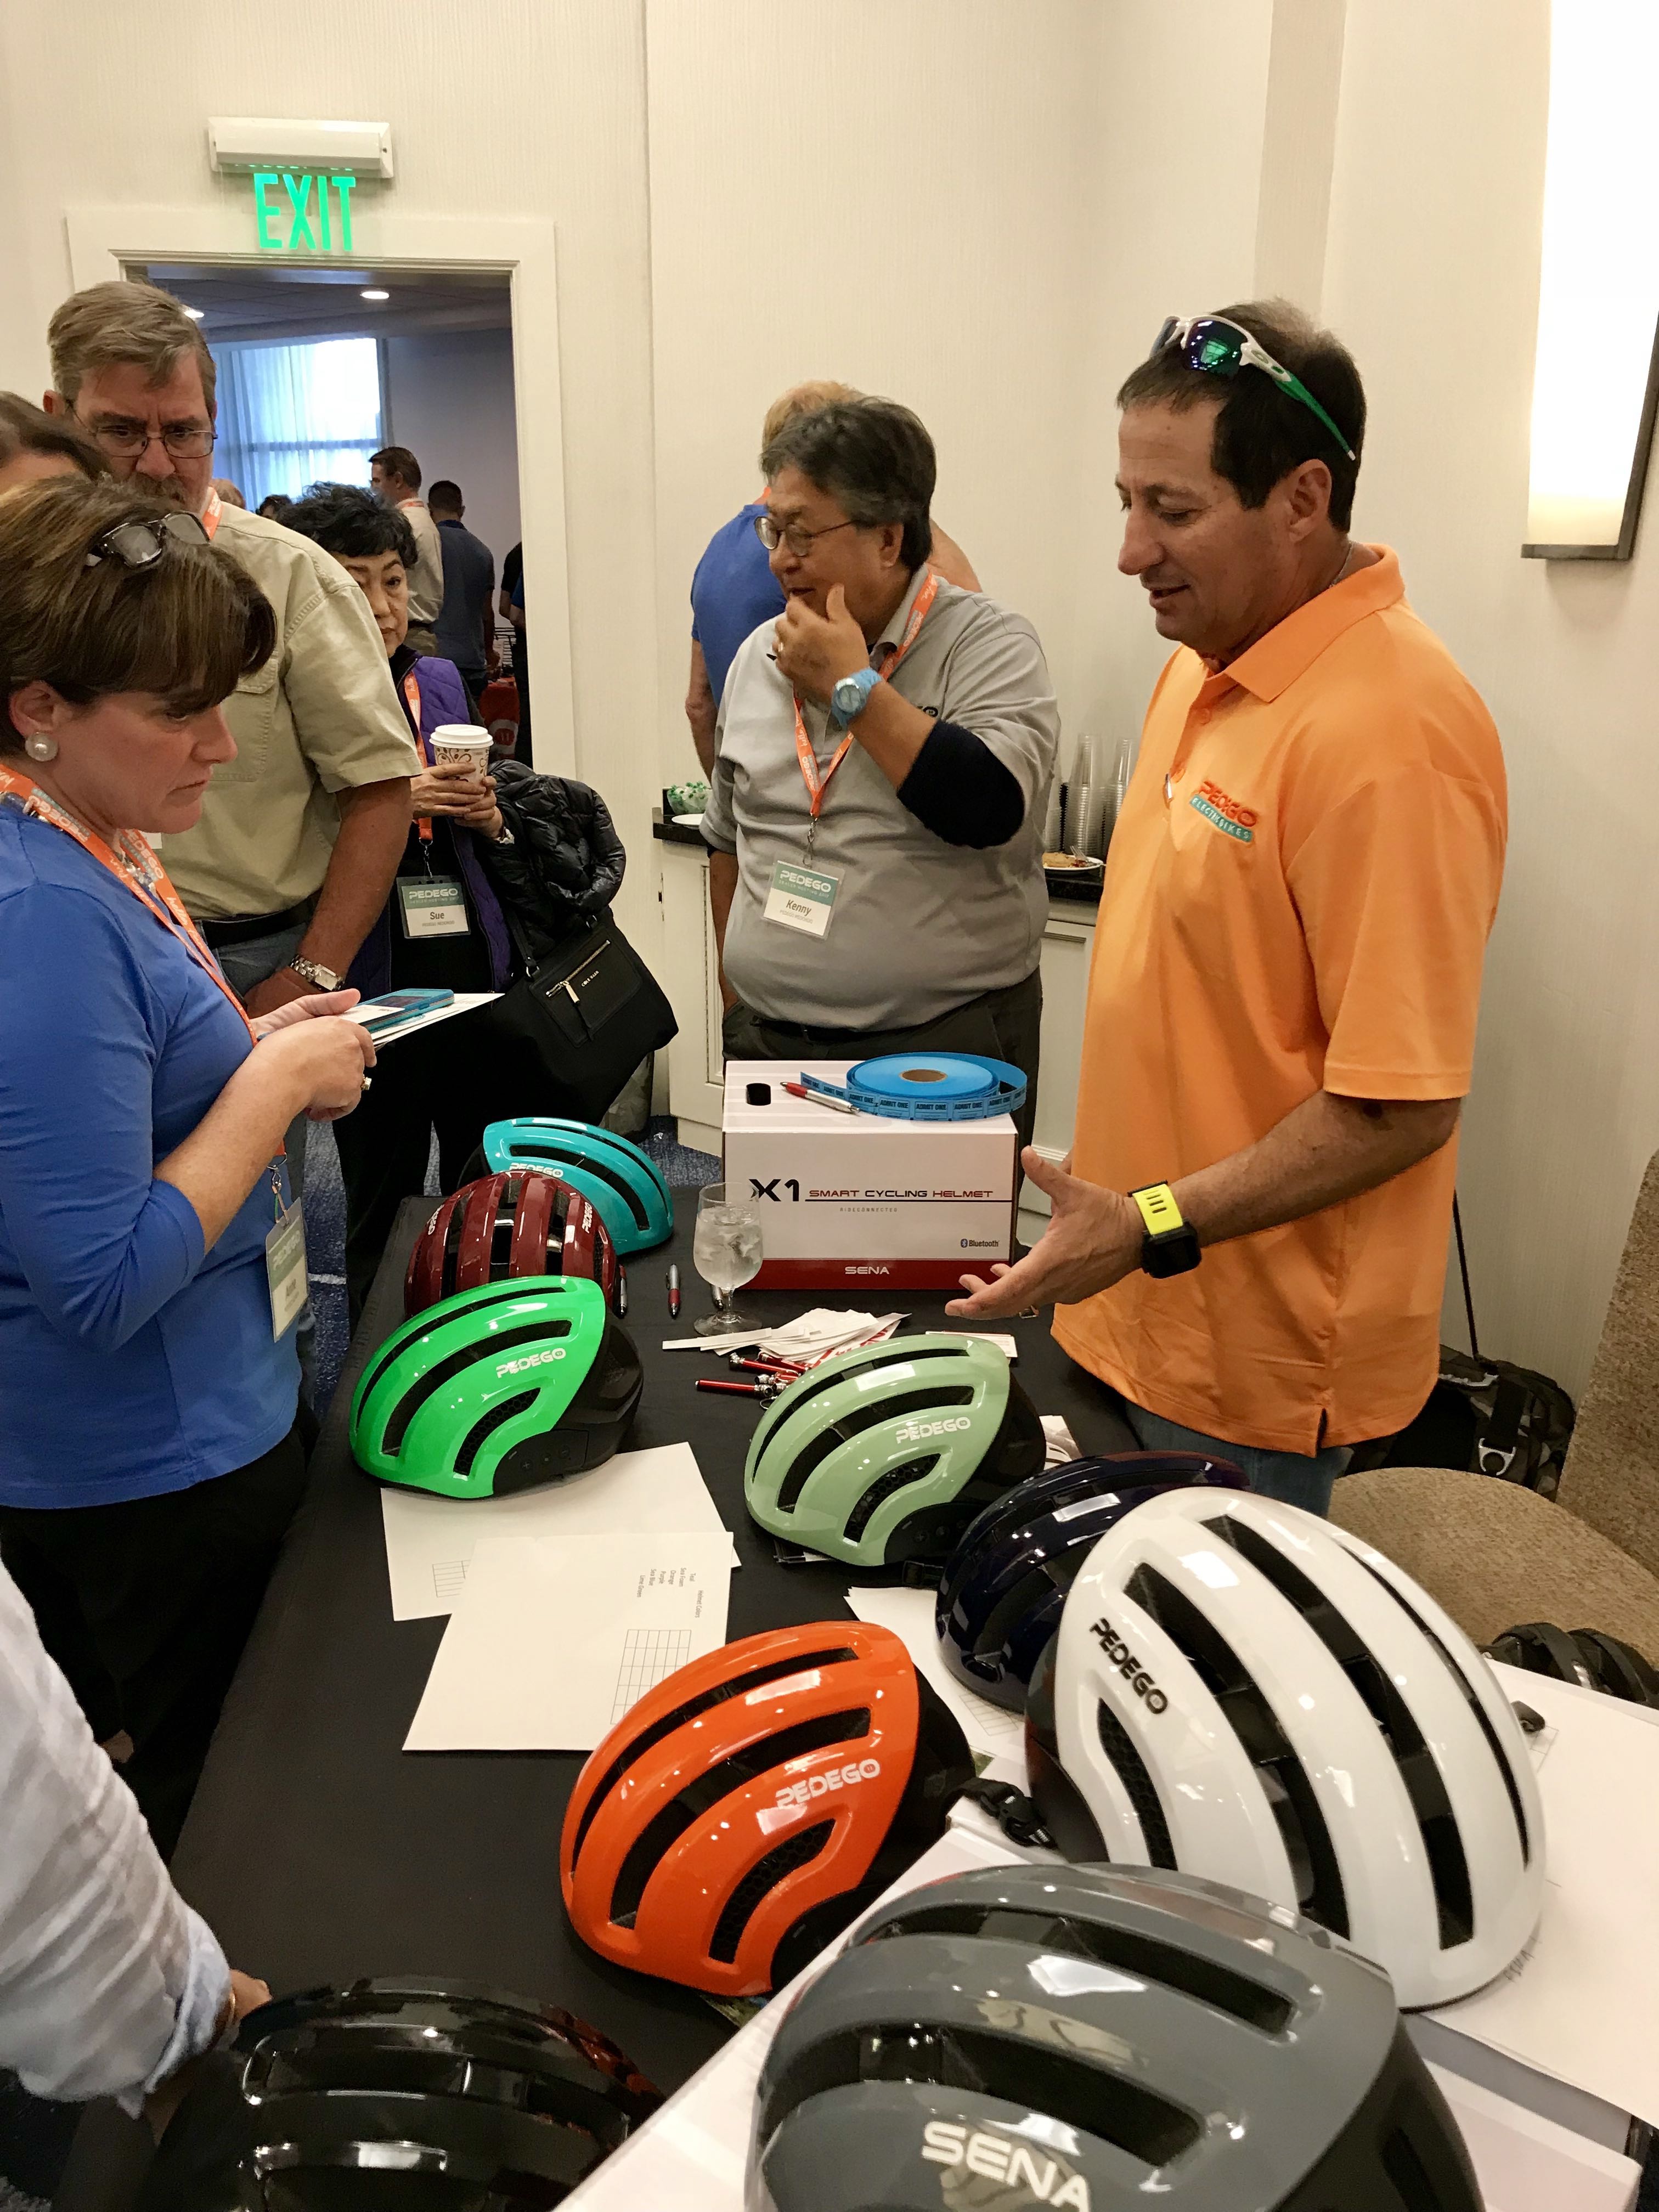 Several new parts and accessories brands exhibited at the event, including new partners Thule, Brooks, Sena Helmets and several others.